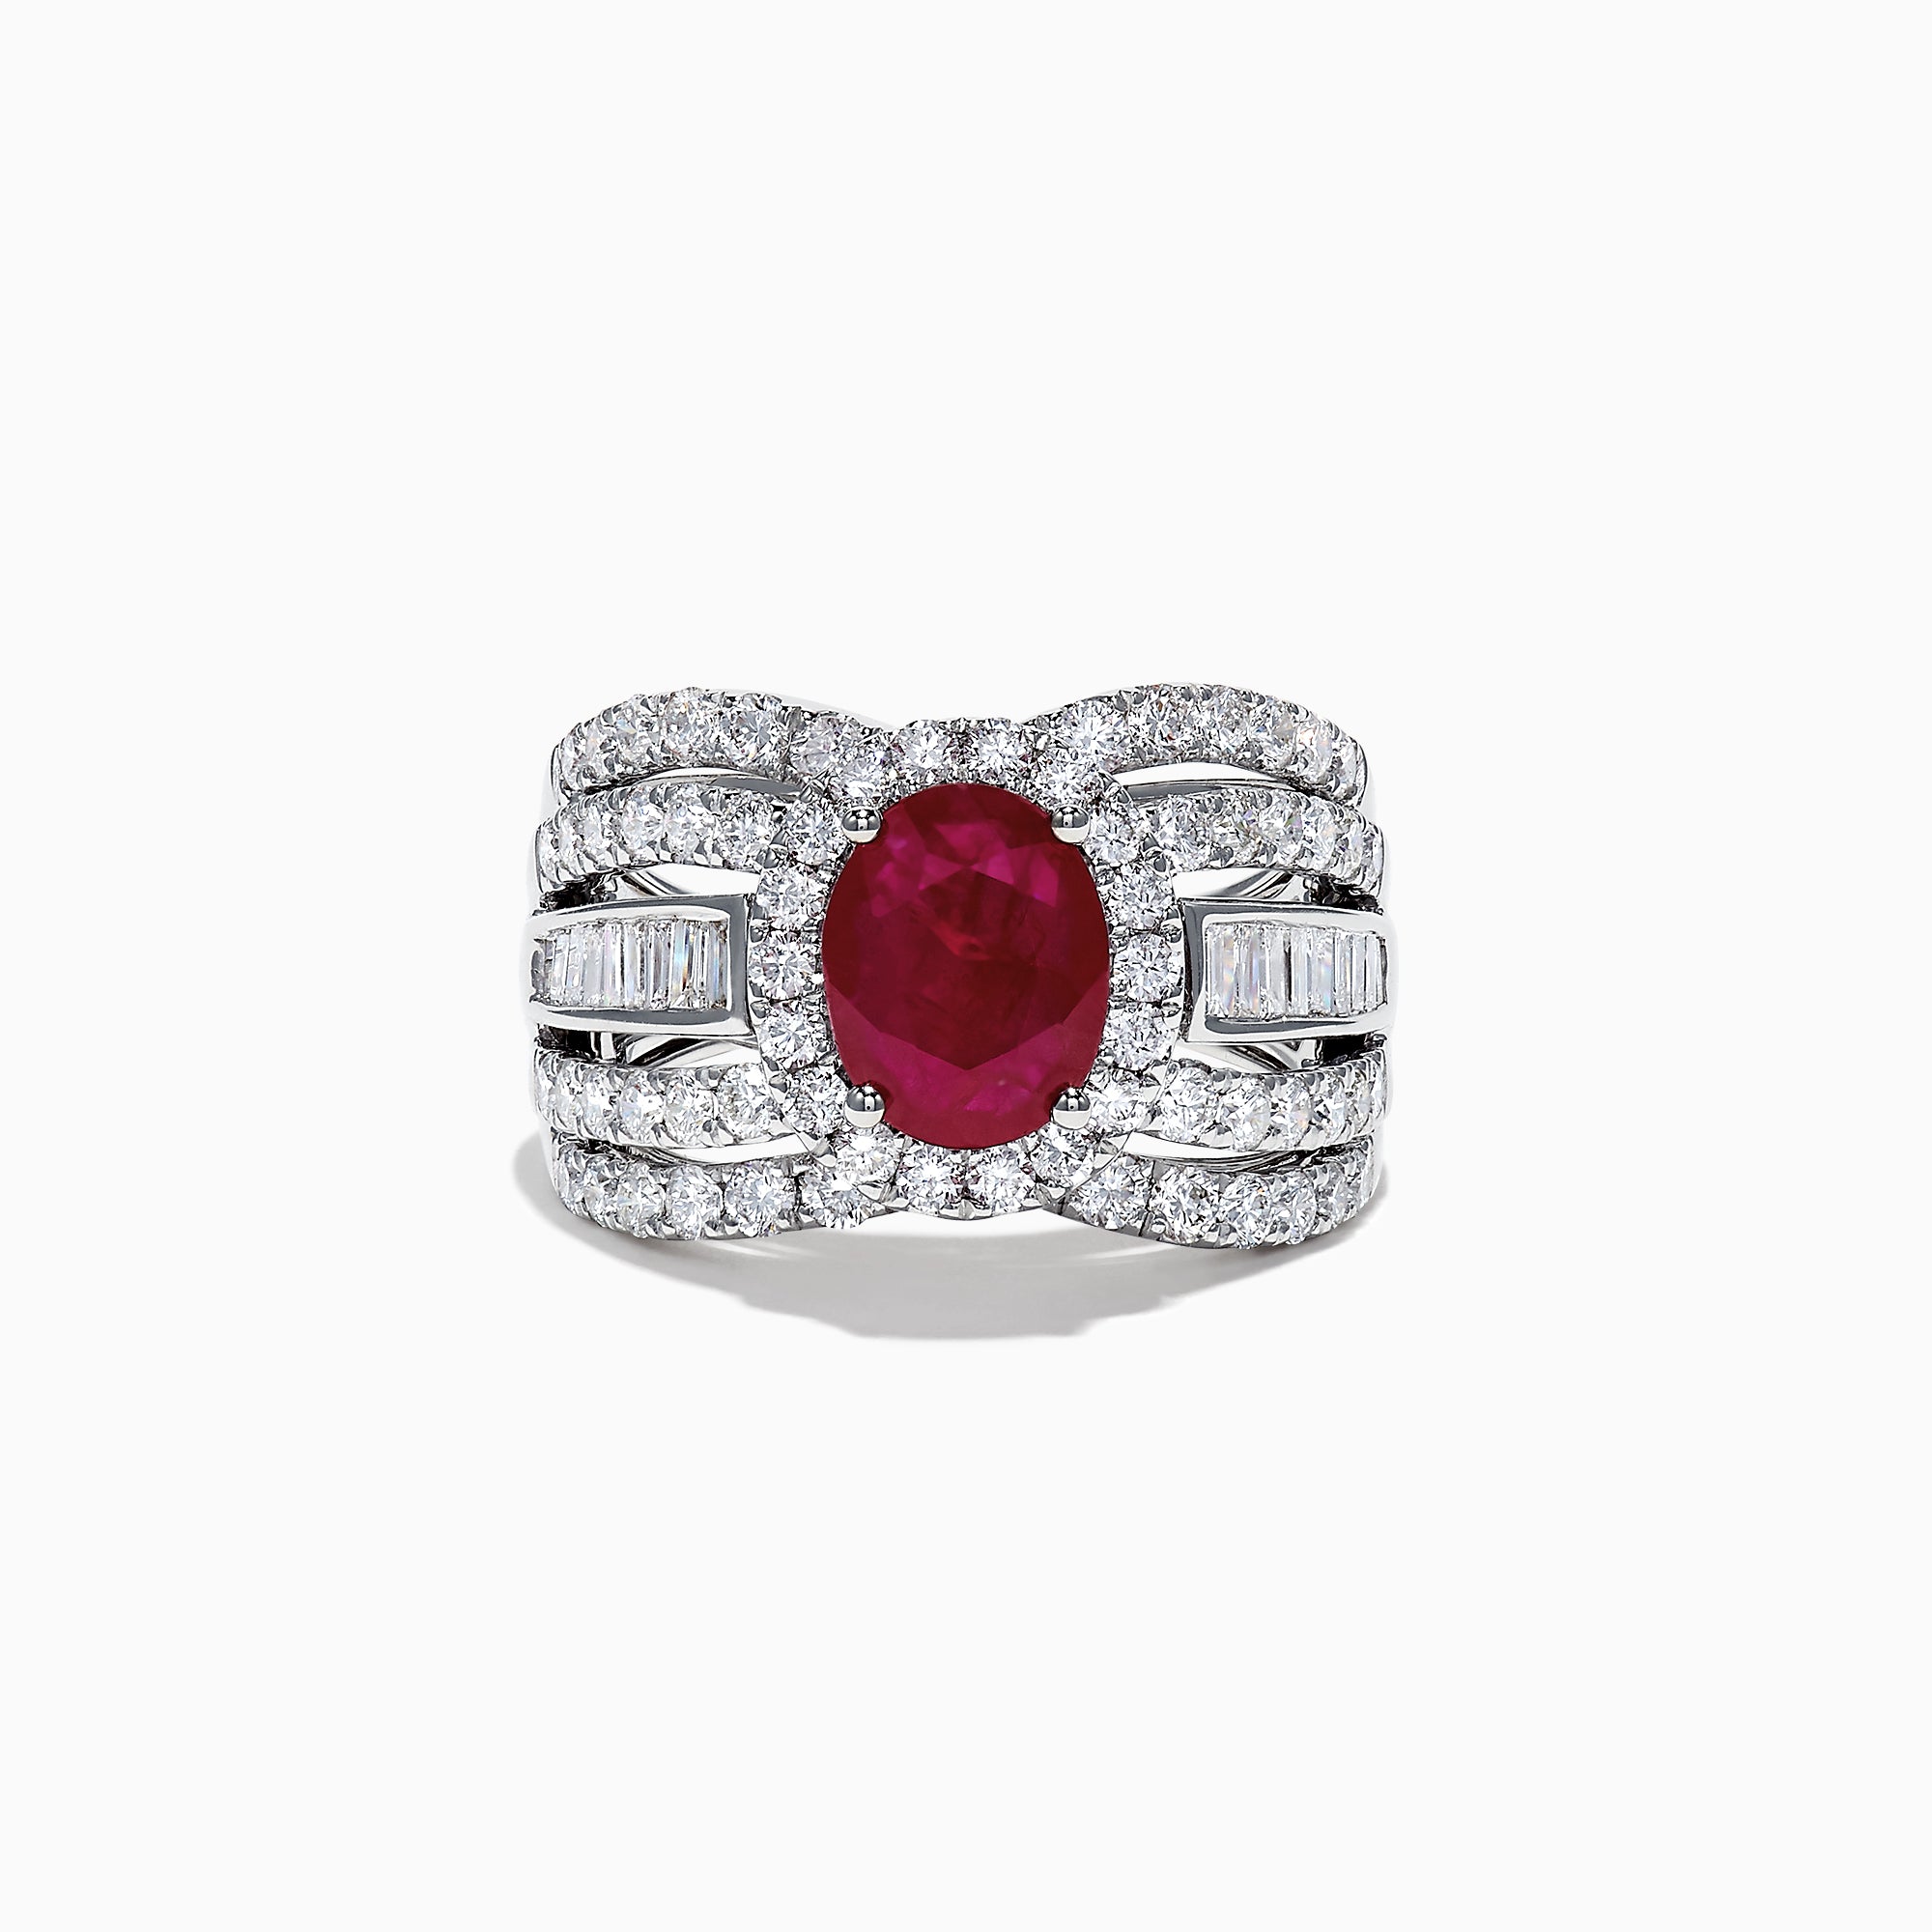 Effy Limited Edition 14K White Gold Ruby and Diamond Ring, 3.59 TCW